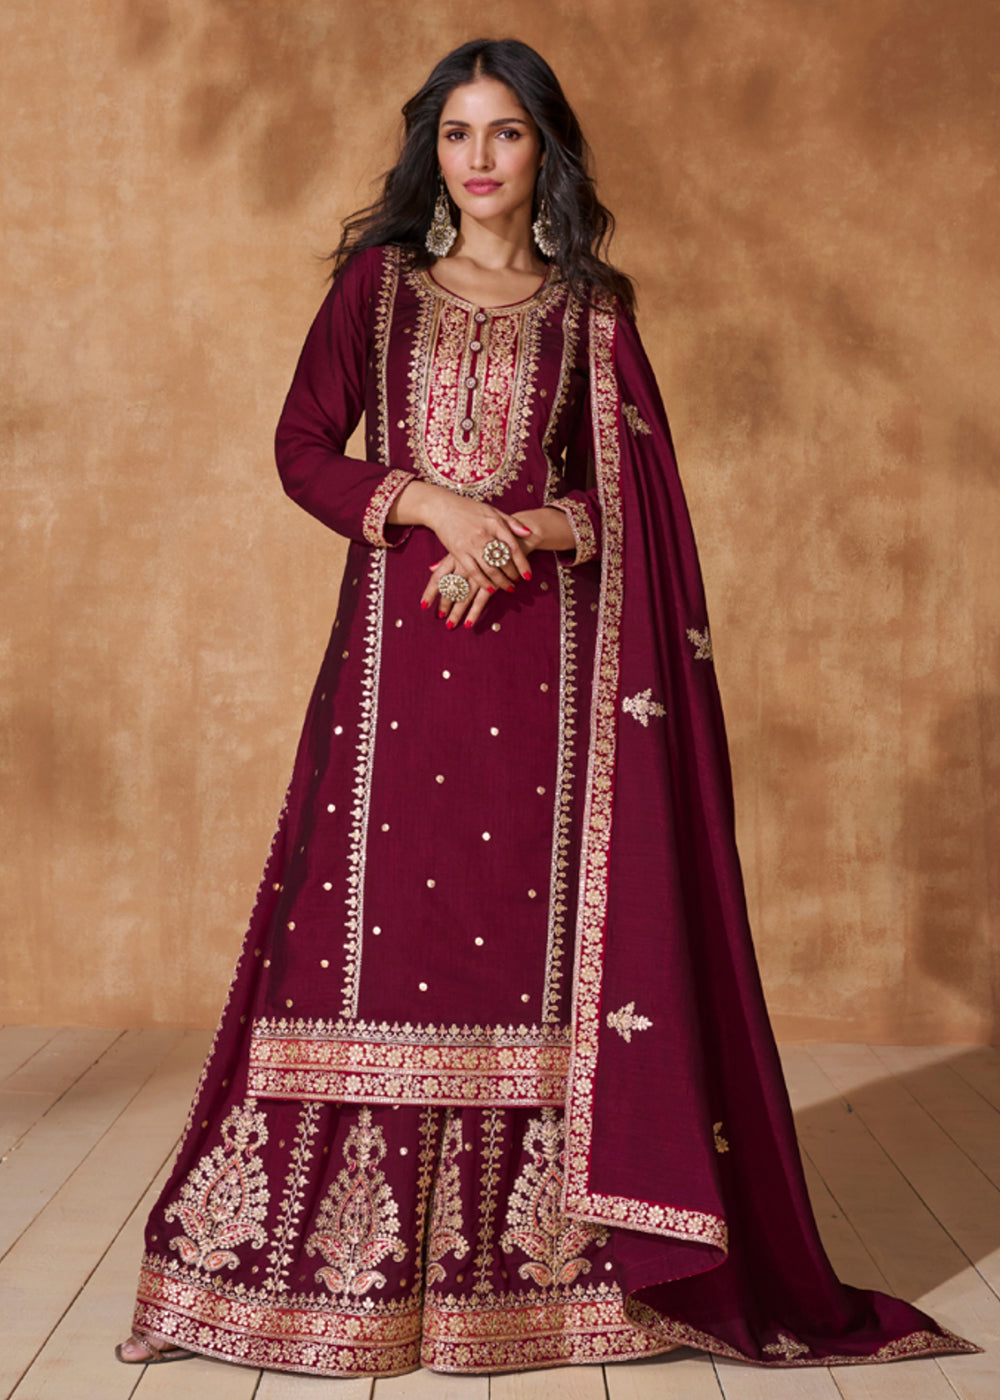 Buy Now Lovely Wine Premium Silk Designer Palazzo Style Suit Online in USA, UK, Canada, Germany, Australia & Worldwide at Empress Clothing.